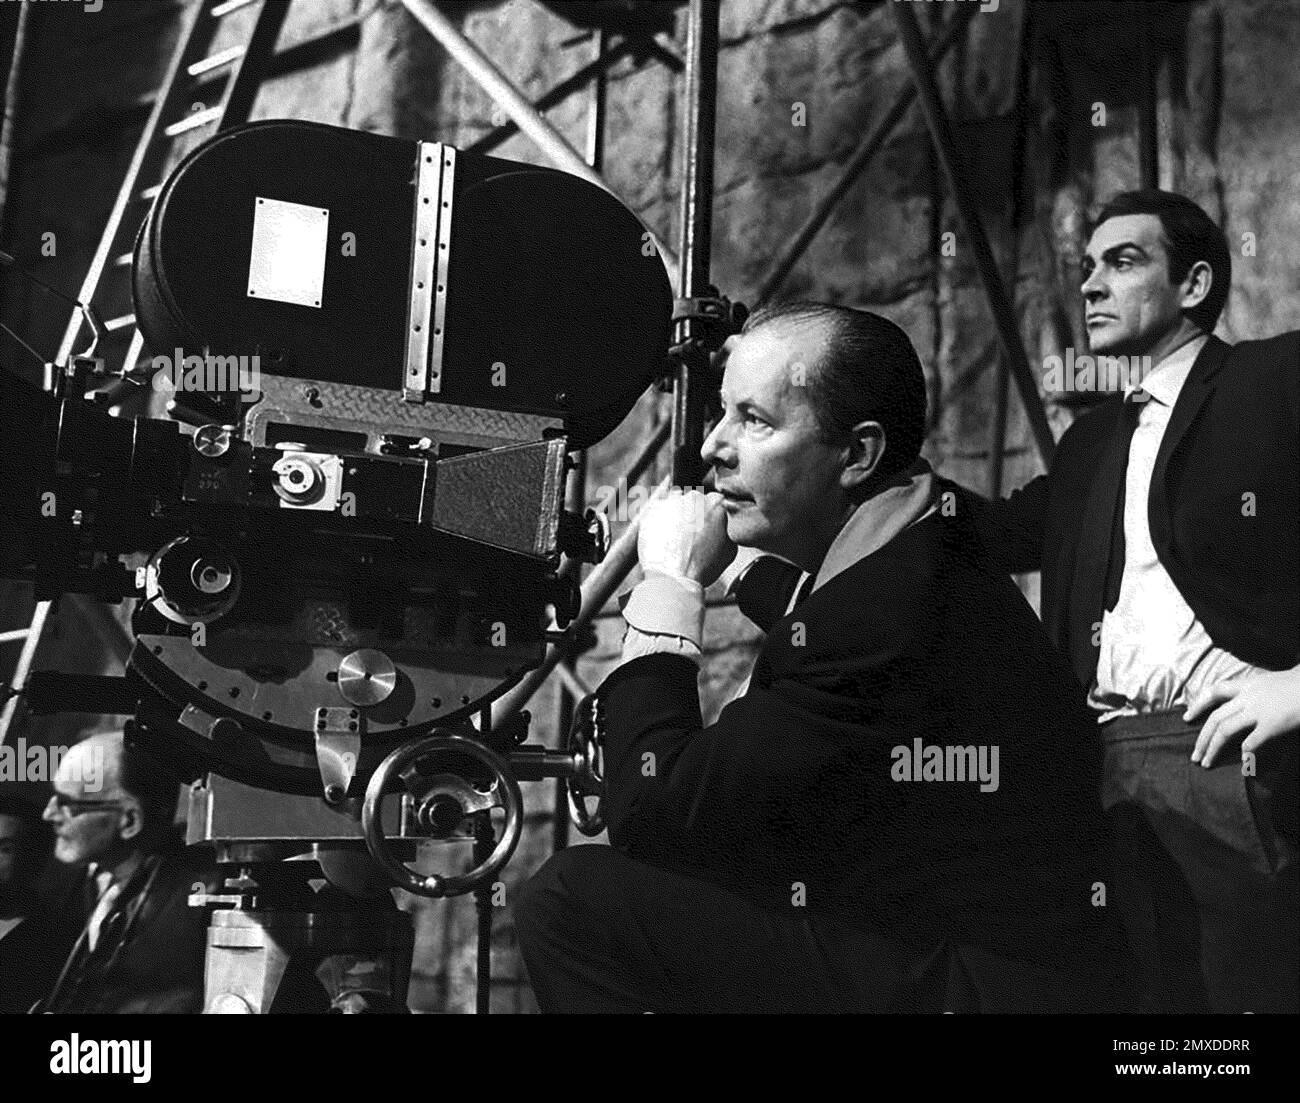 Terence Young (1915-1994) und Sean Connery am Set von Thunderball. Museum: PRIVATE SAMMLUNG. Autor: ANONYM. Stockfoto